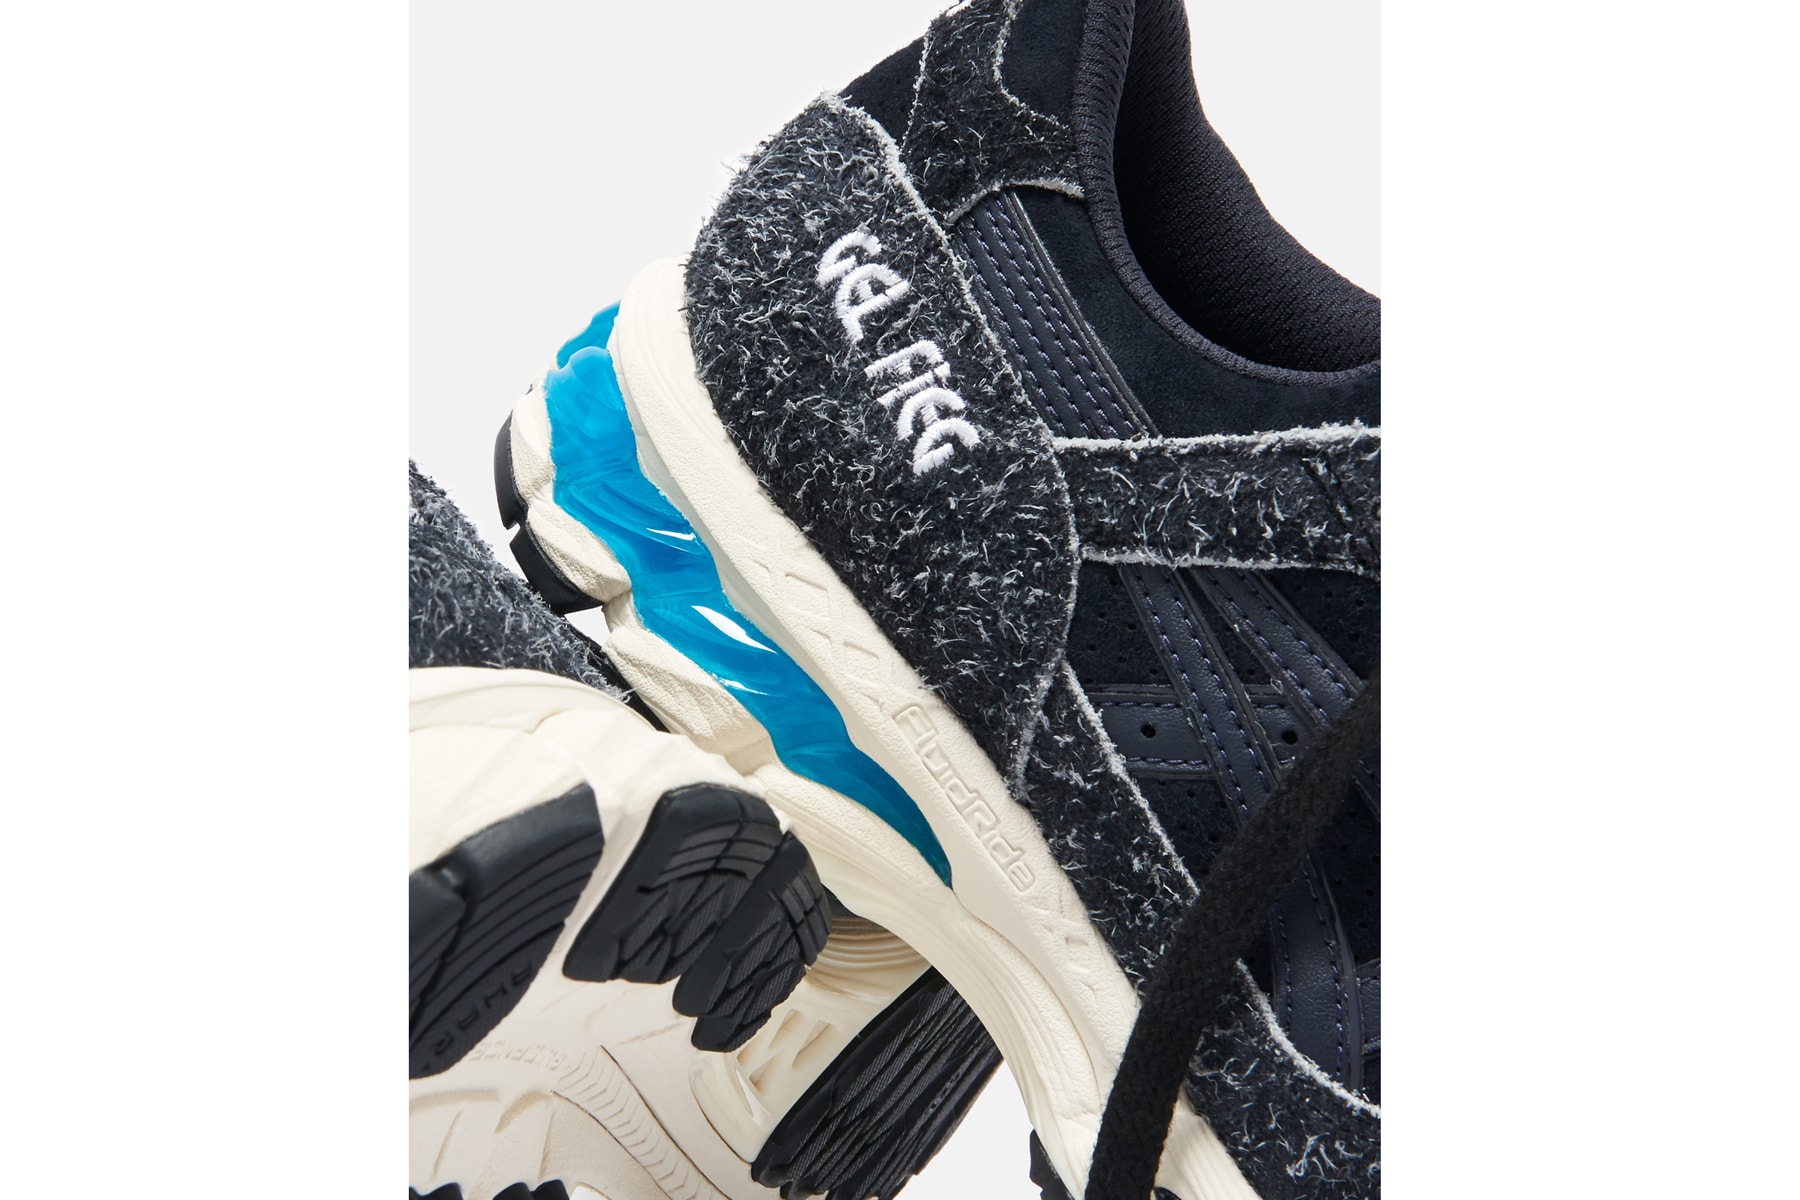 Ronnie Fieg x ASICS “Super Blue” GEL-Lyte III 10th anniversary collaboration preview footwear sneakers Ronnie Fieg x ASICS Super Blue 10th Anniversary Capsule release